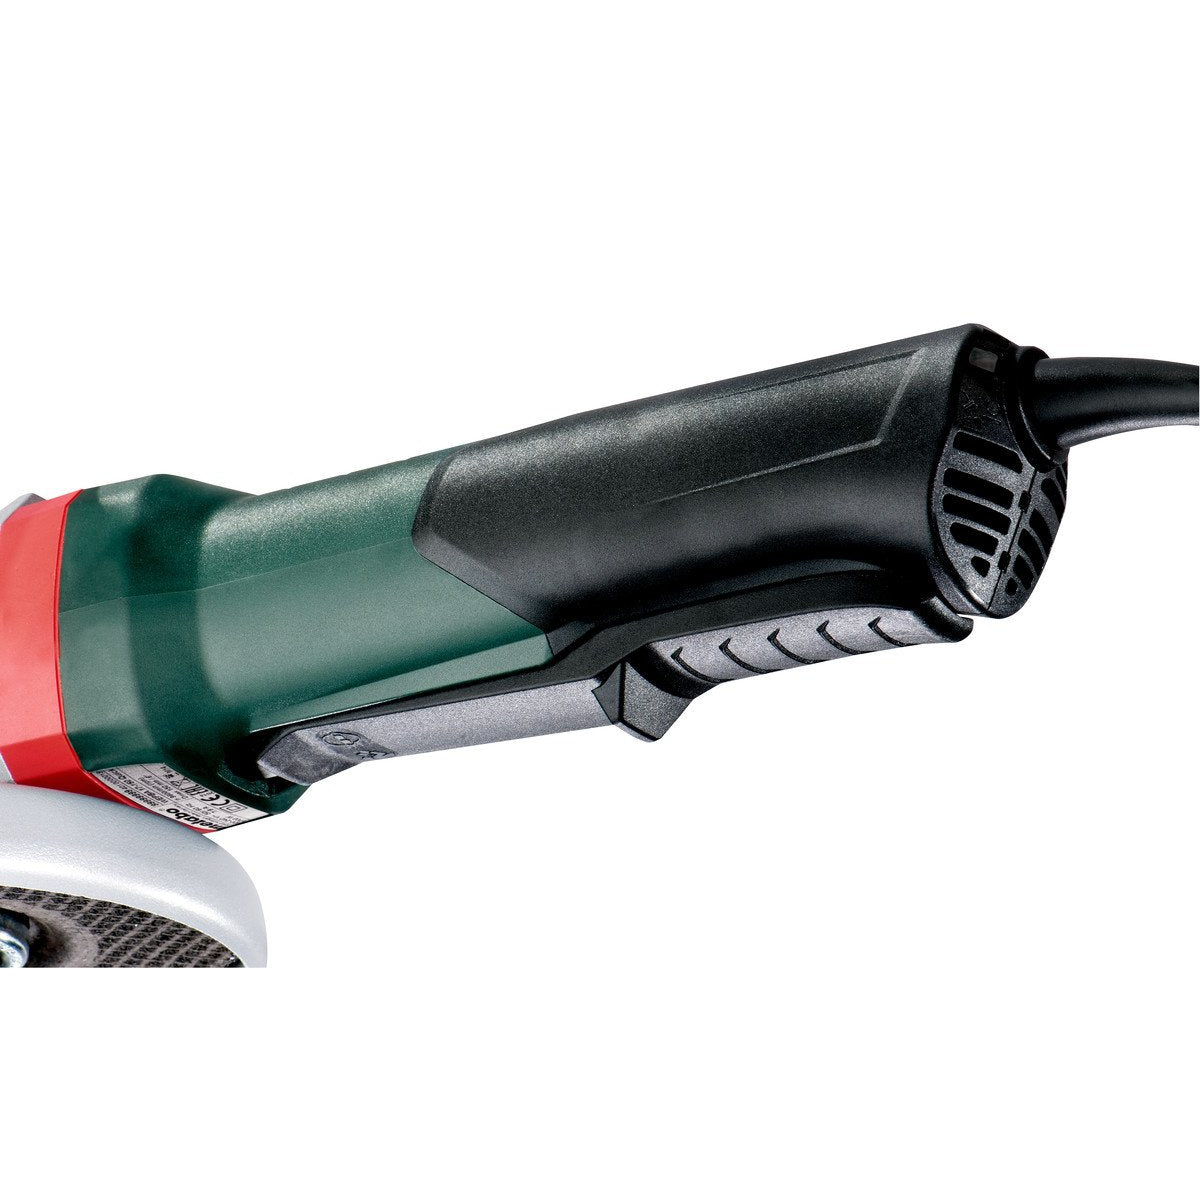 Metabo WPB 13-125 Quick DS 5" Angle Grinder - 600437420